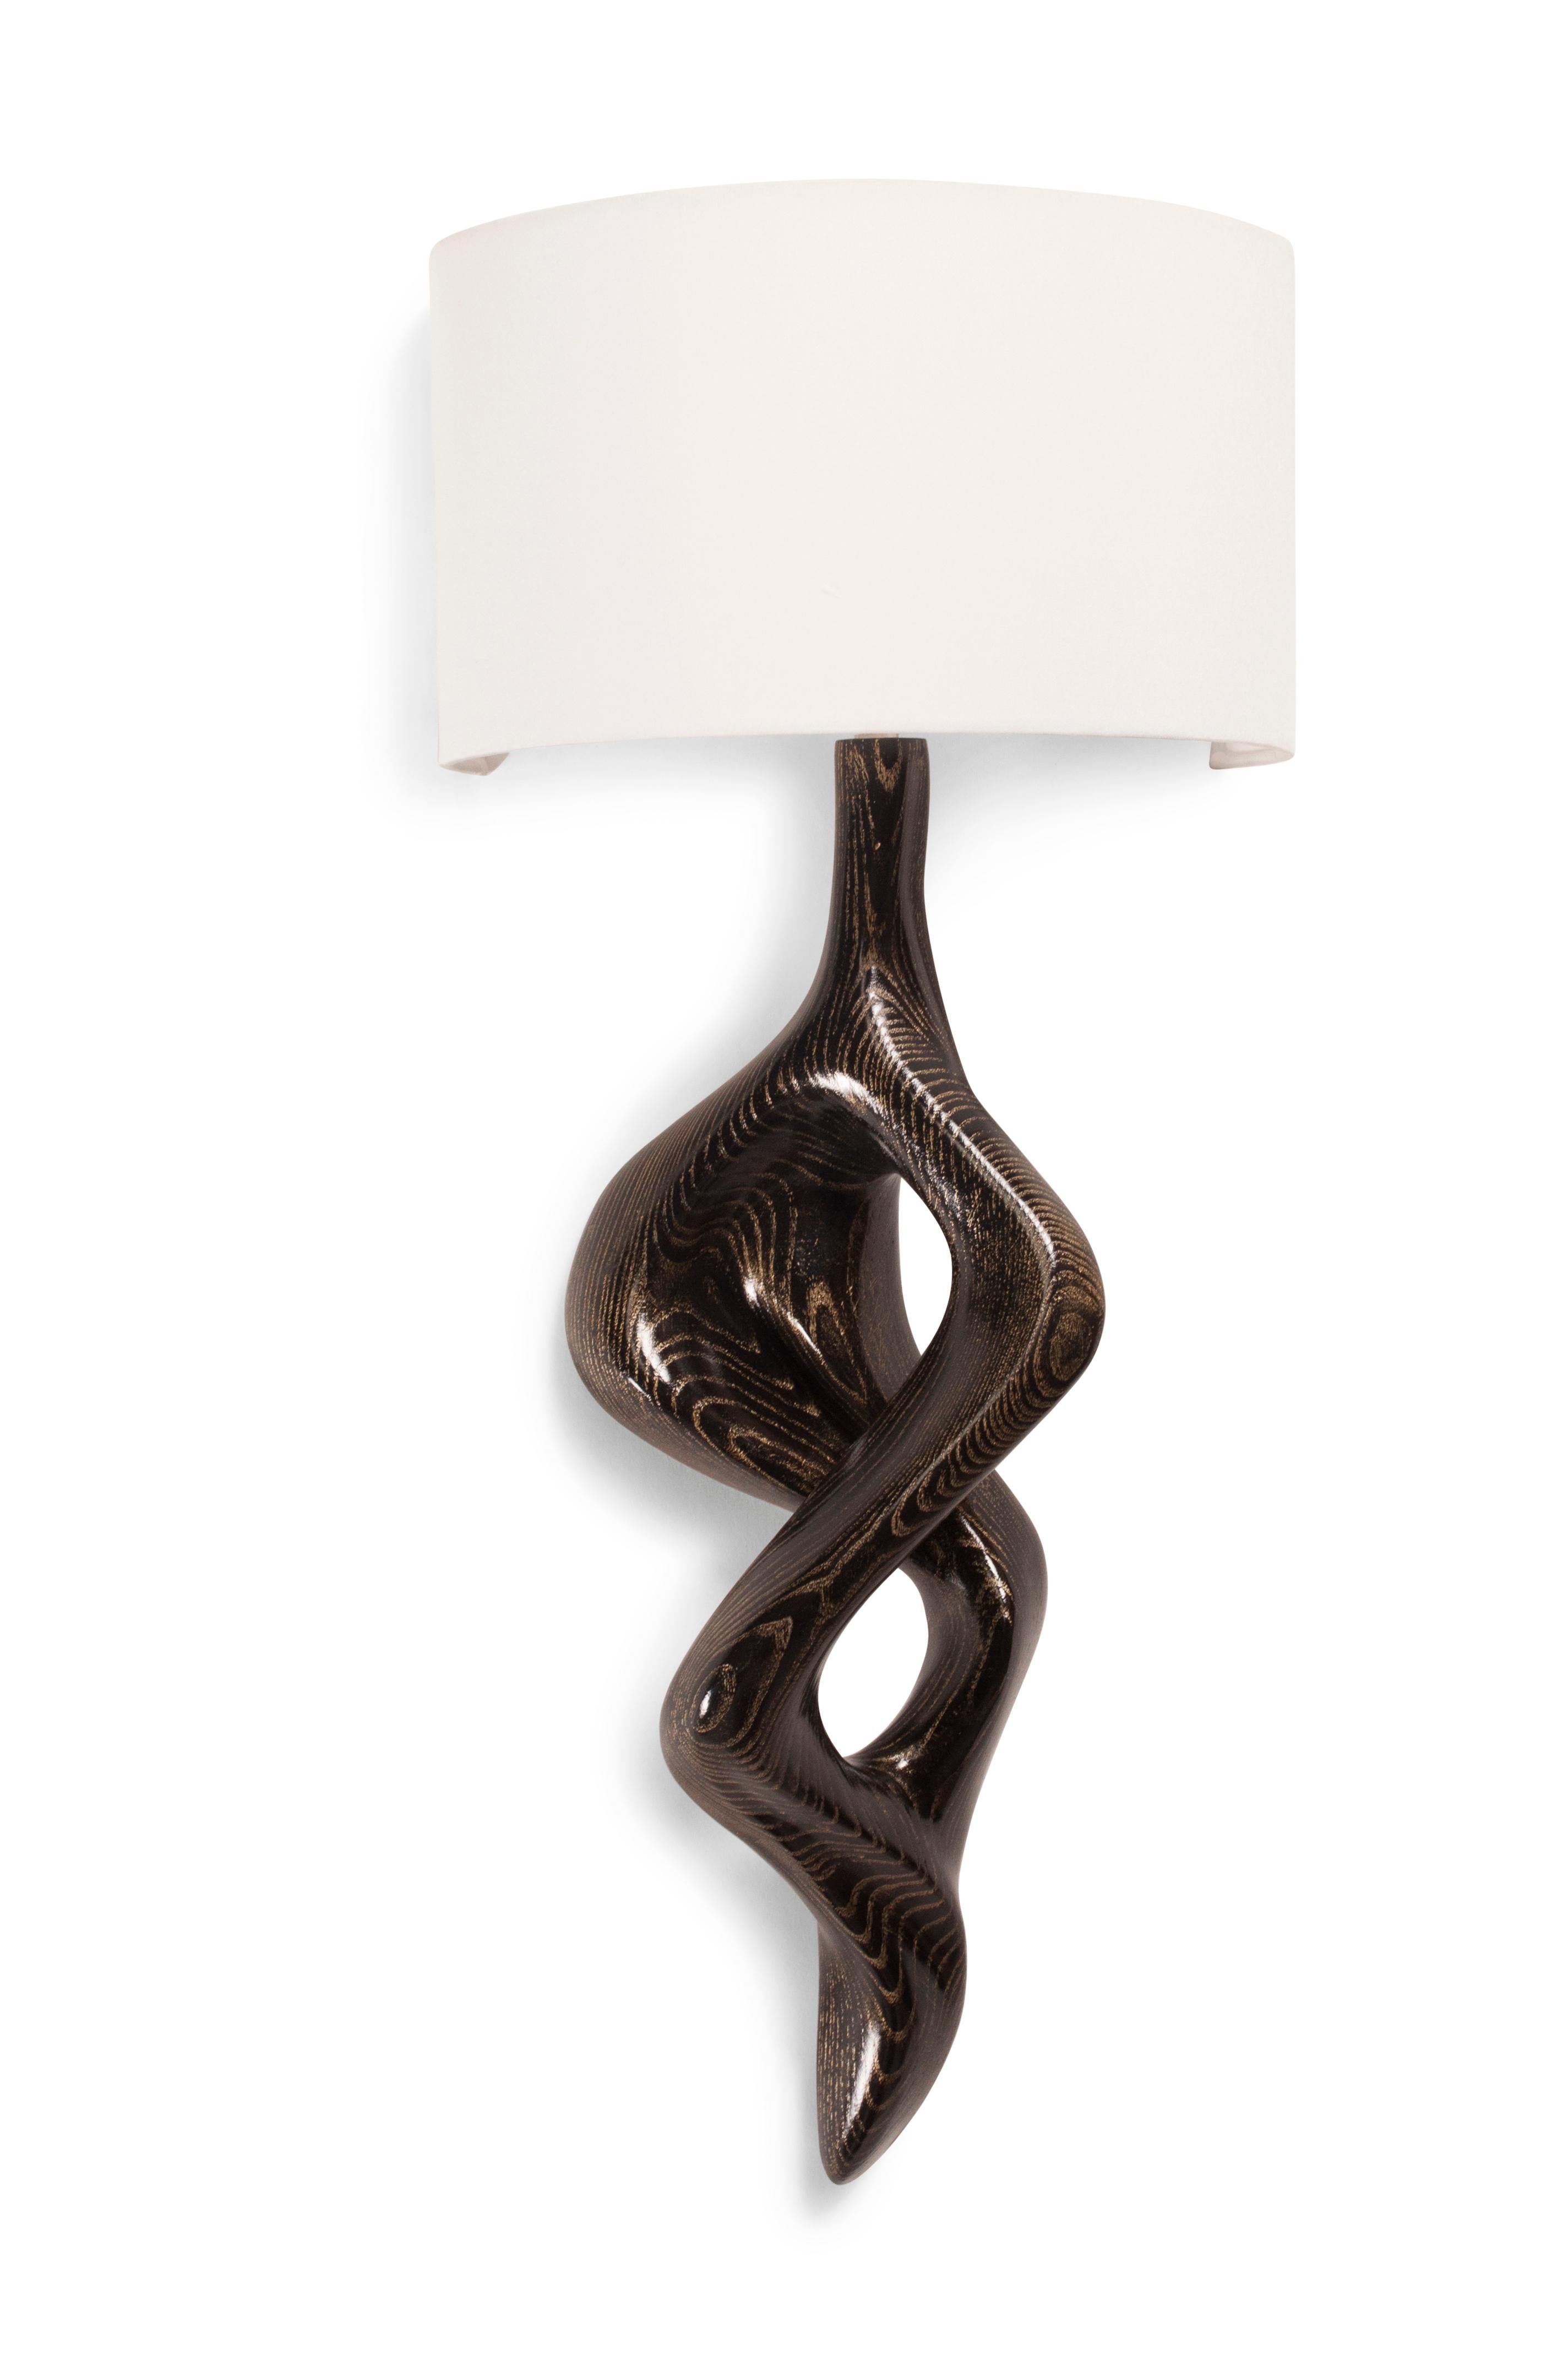 Nomi Sconce is carved from solid wood walnut with half a drum shape shade. Shade dimensions: 12